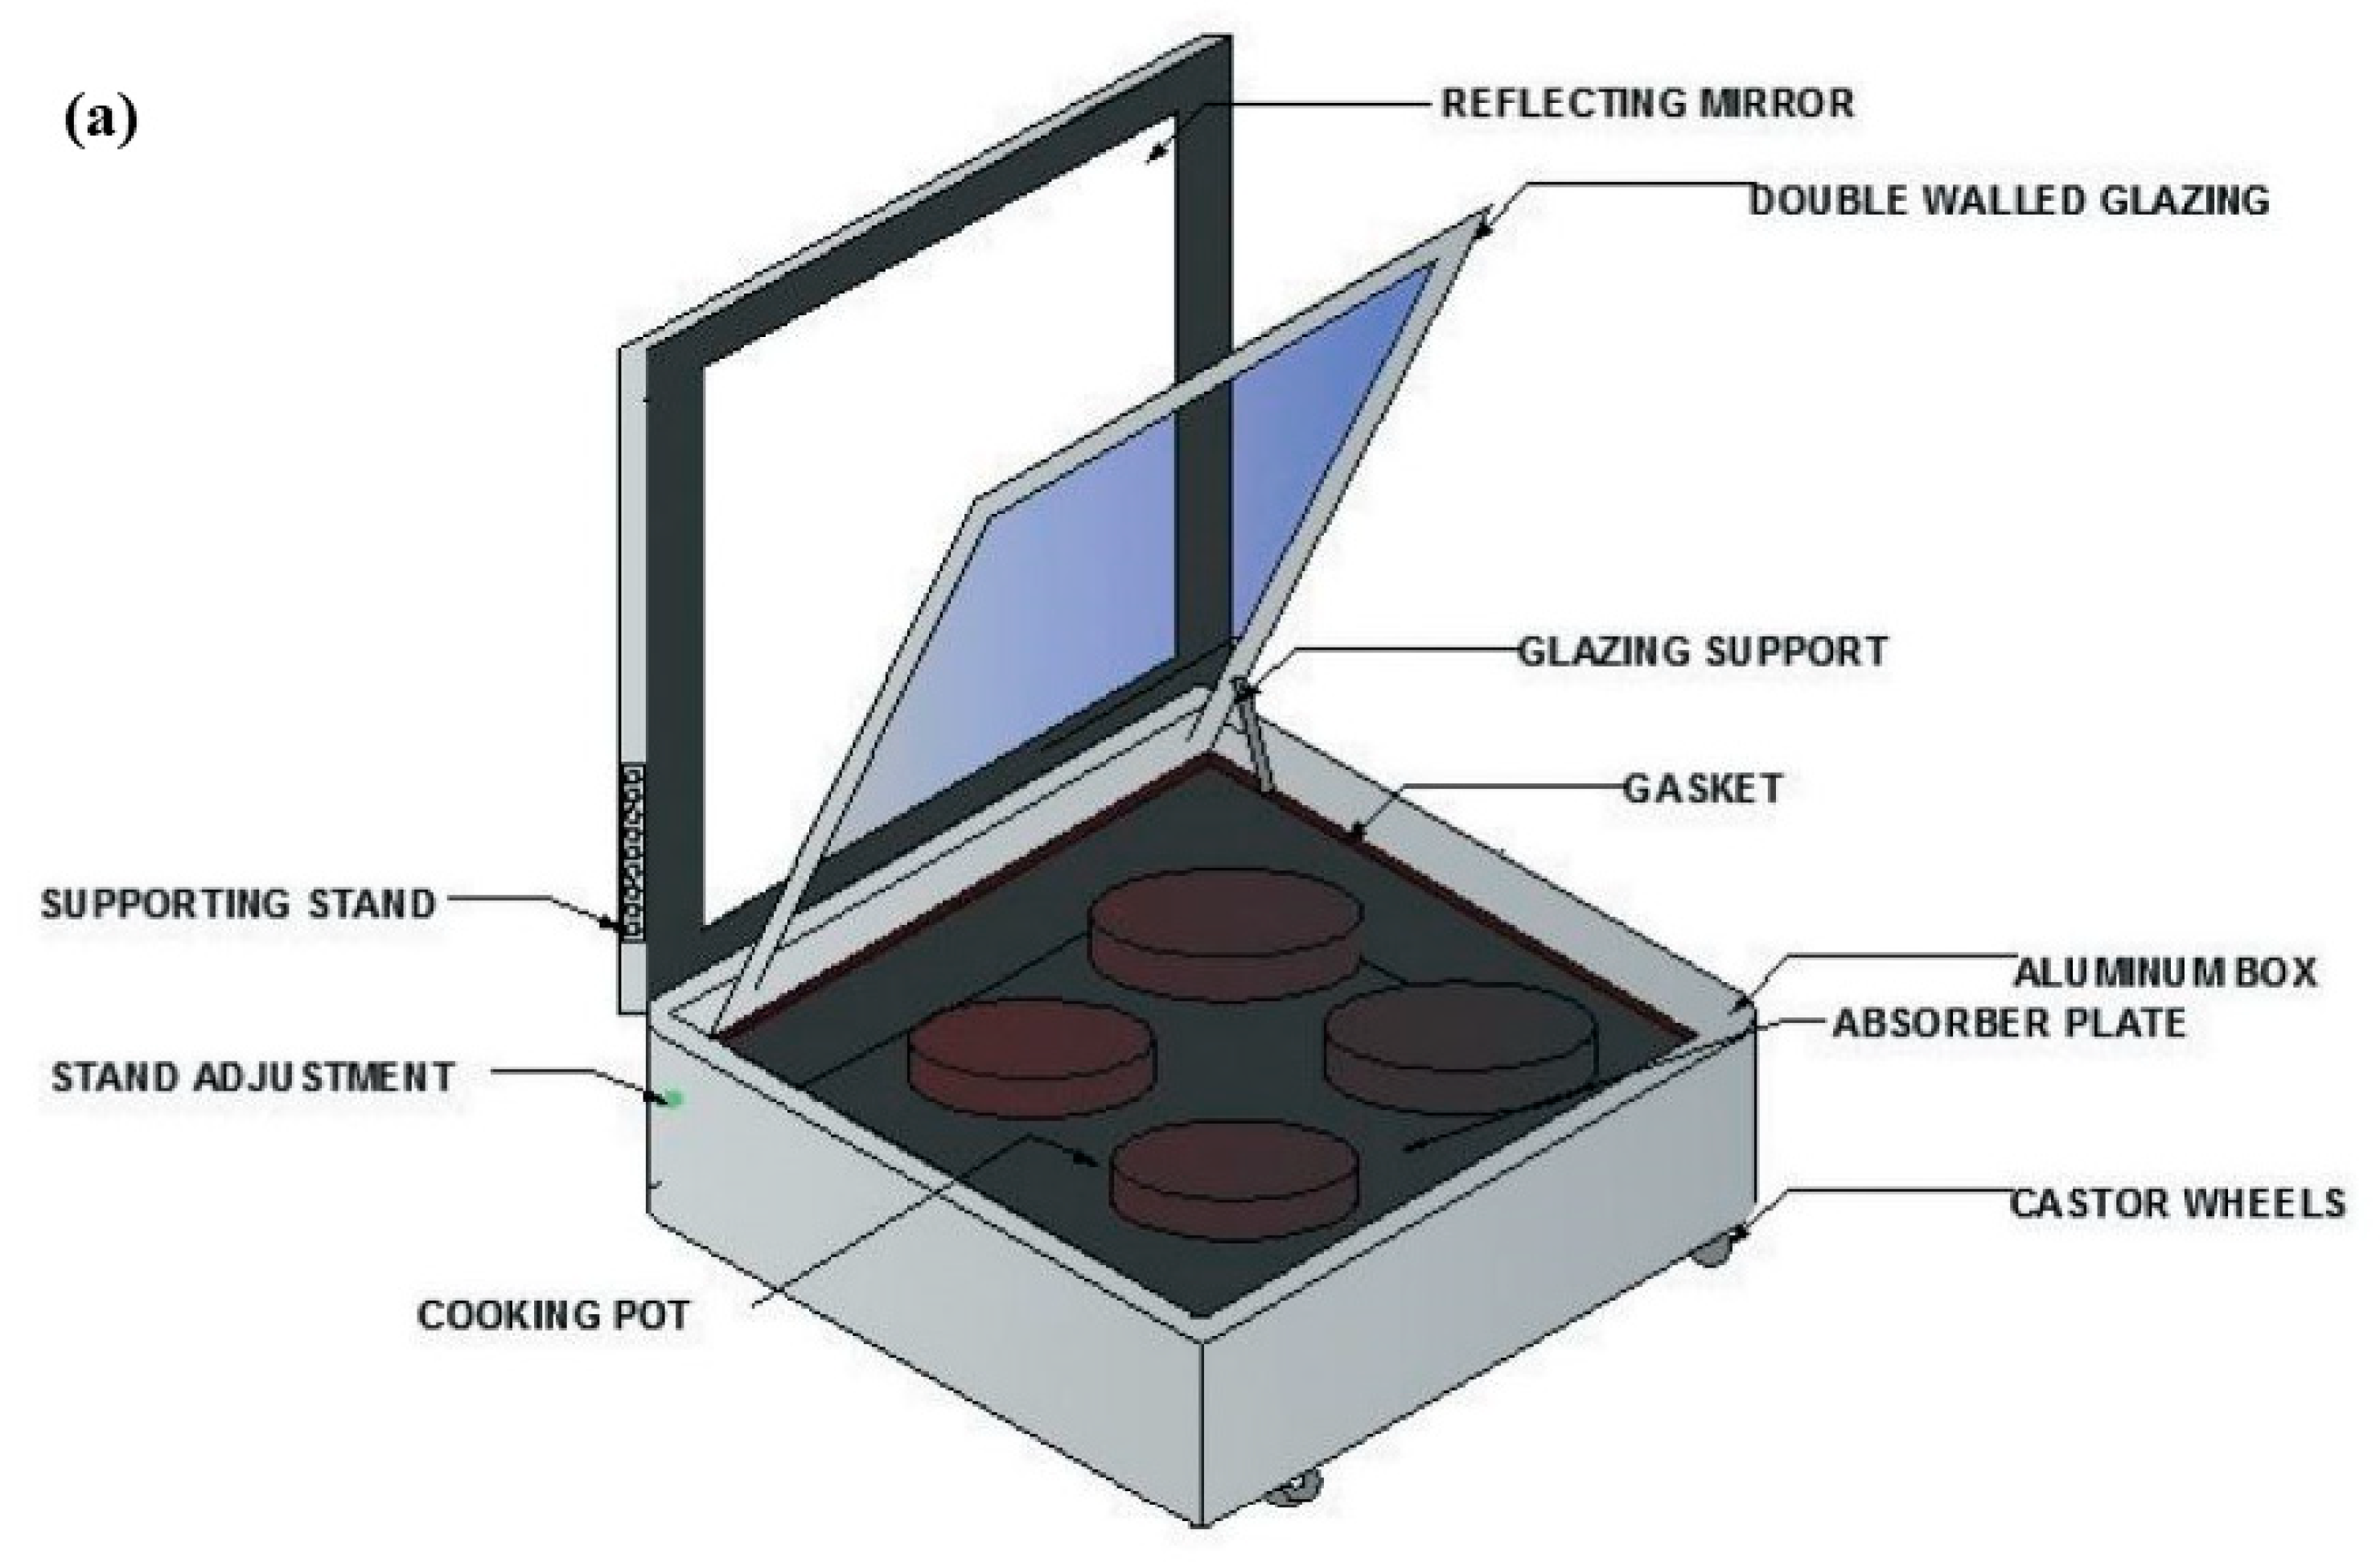 PDF] Implementation Issues and Economic Viability of Box Type Solar Cooker  in Indian Scenario | Semantic Scholar